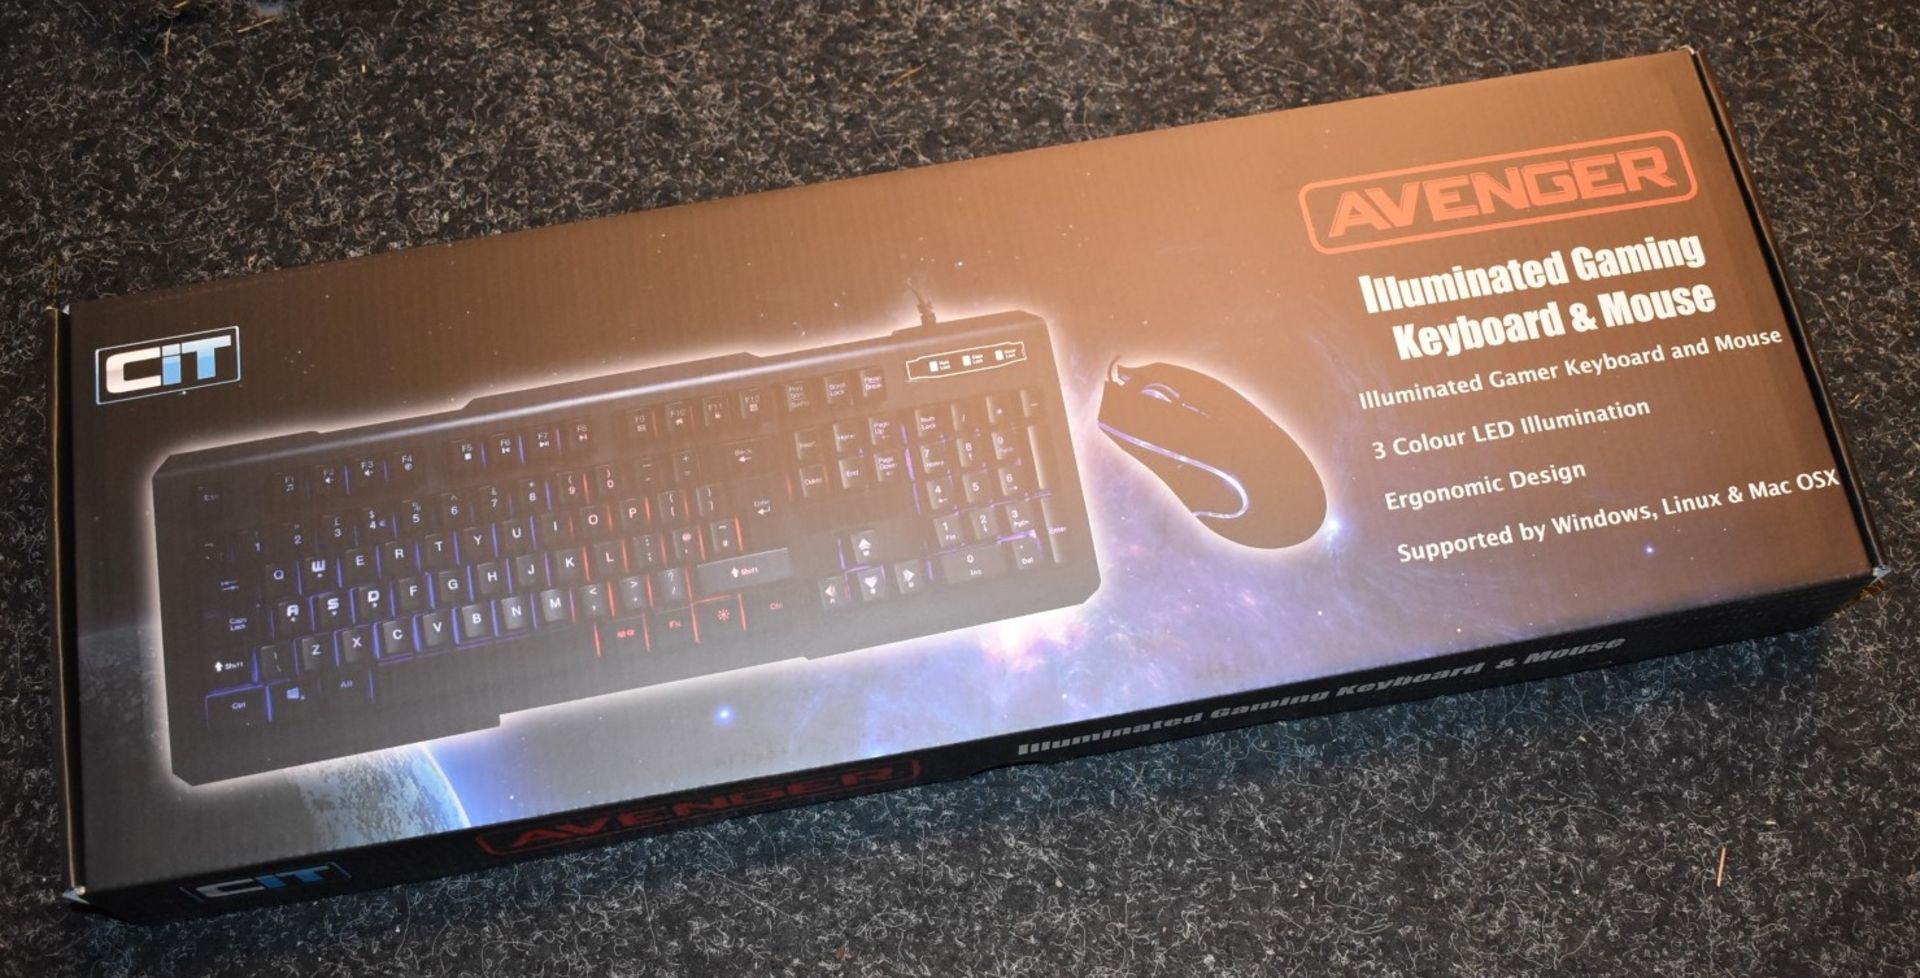 1 x CiT Avenger Gaming Keyboard and Mouse Set - Features 3 Colour Mode LED Backlight